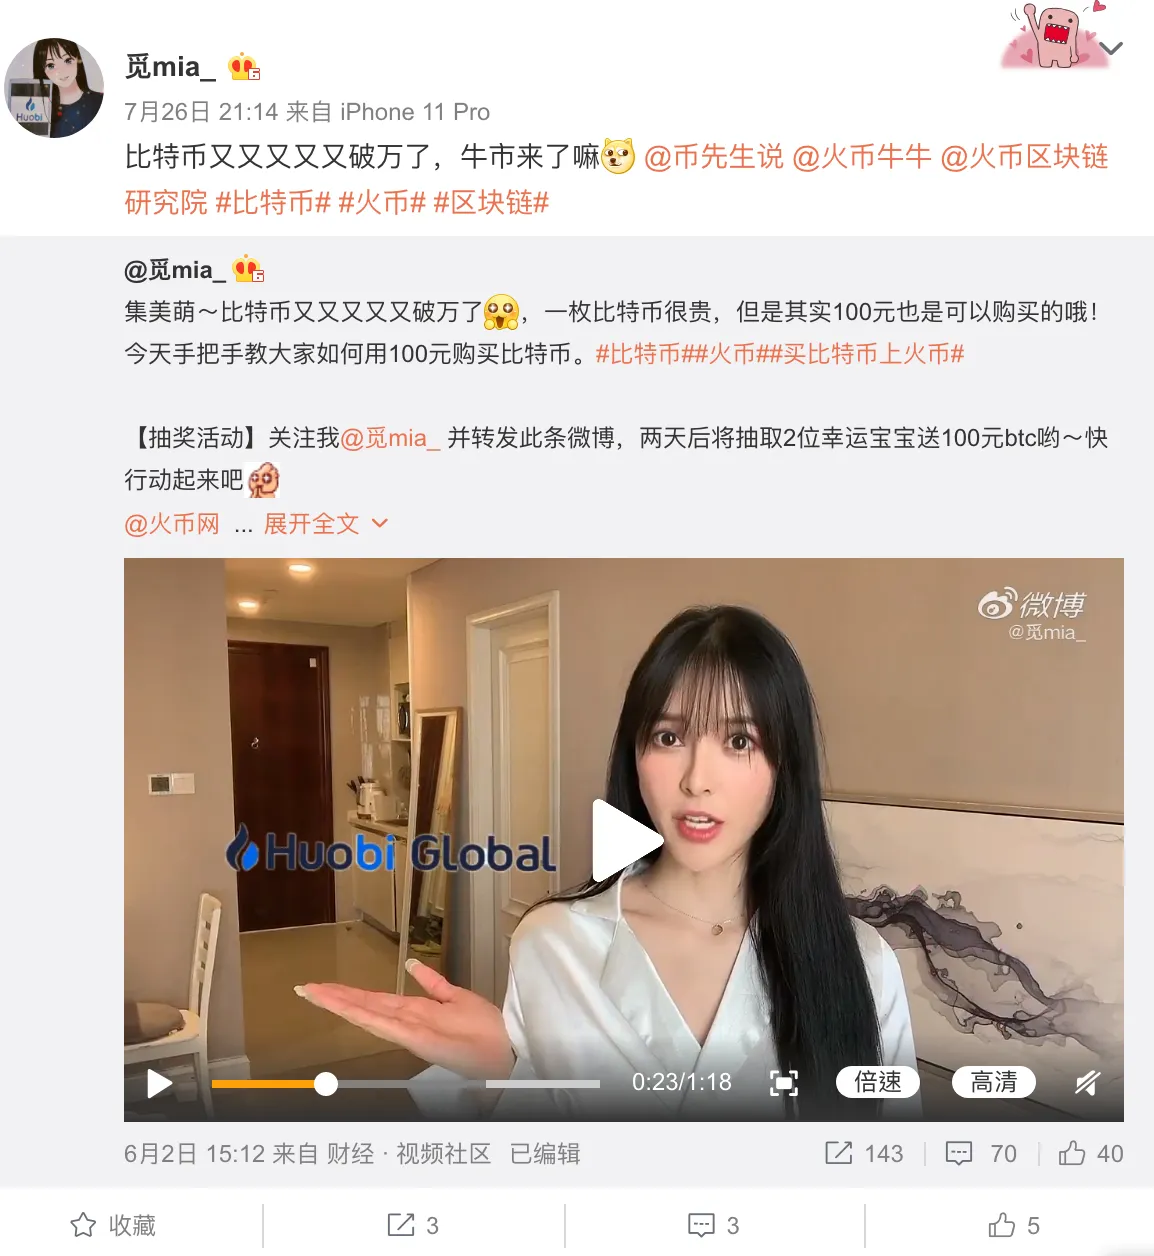 One of Huobi's online influencers instructs users how to buy BTC with 100 RMB